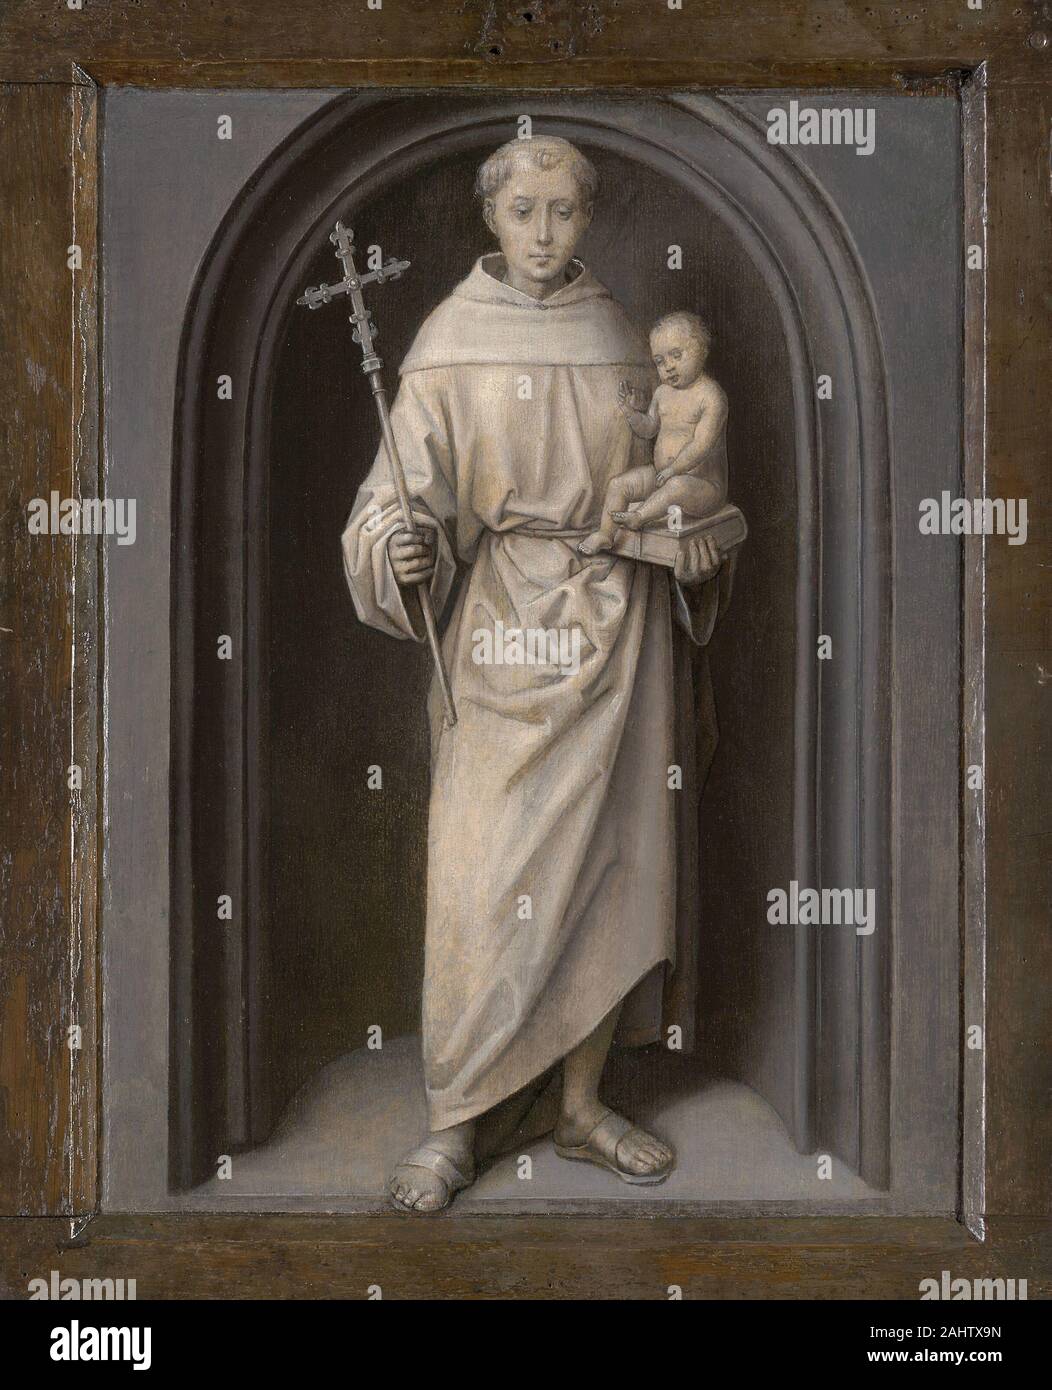 Hans Memling. Saint Anthony of Padua. 1480–1490. Netherlands. Oil on panel Hans Memling probably worked with Rogier van der Weyden in Brussels before settling in Bruges in 1465. Van der Weyden was well known for his exquisite devotional diptychs, and Memling was influenced by his work, though he made his paired paintings more realistic by setting the figures in a measurable domestic space. This portrait of the unidentified patron and the image of the Virgin and Child were separated many years ago; they were reunited at the Art Institute of Chicago in 1953. Unfortunately, Portrait of a Man in P Stock Photo